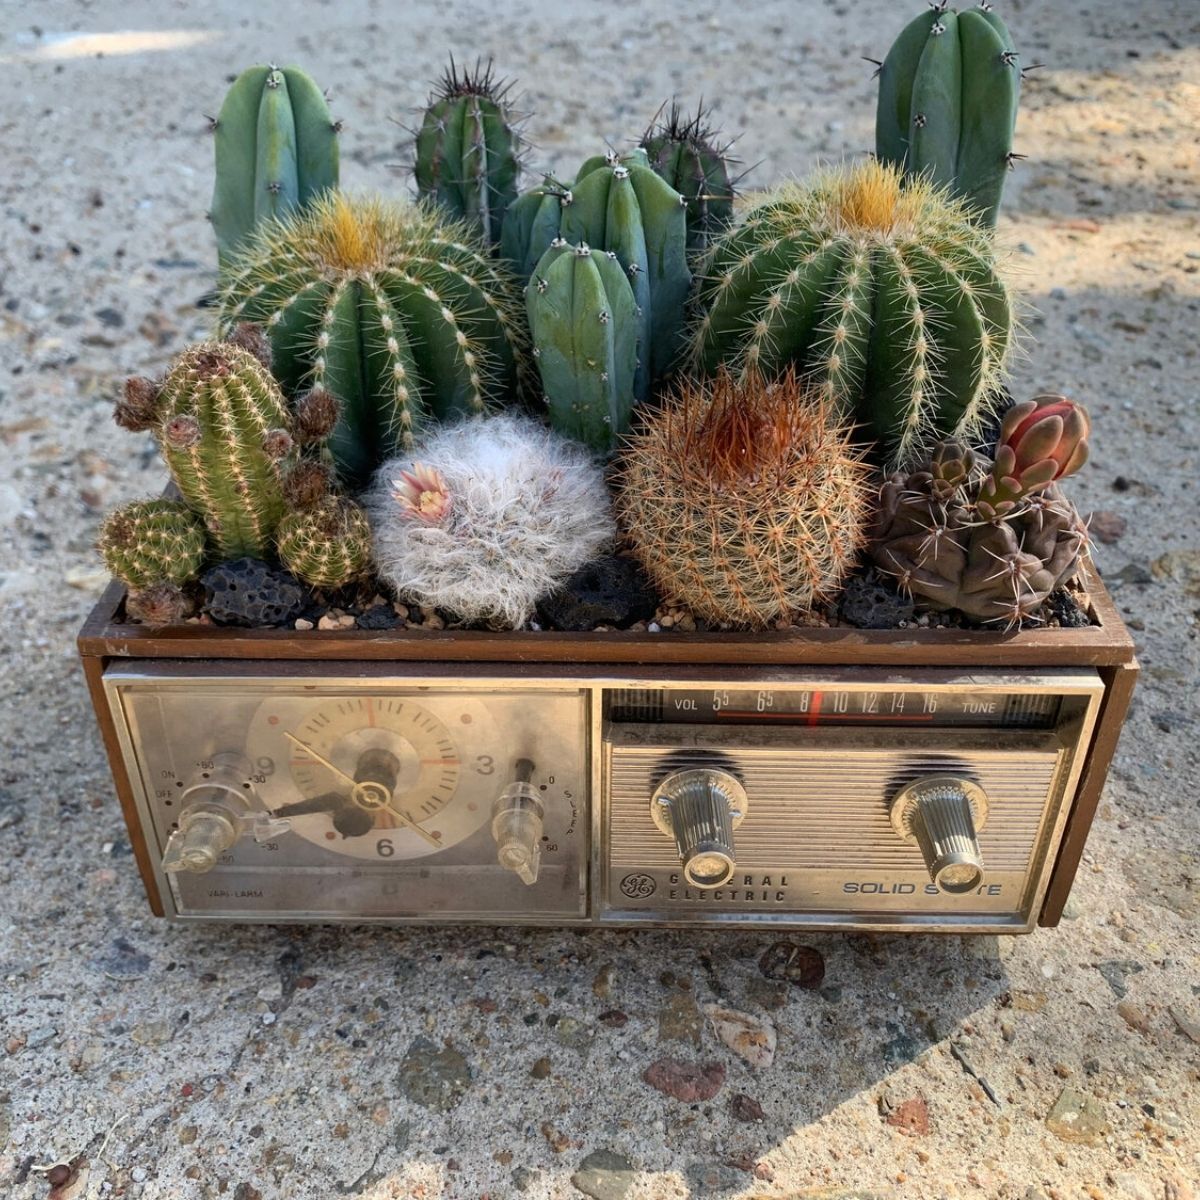 opal-design-brings-cacti-to-life-in-these-incredible-vintage-pieces-featured